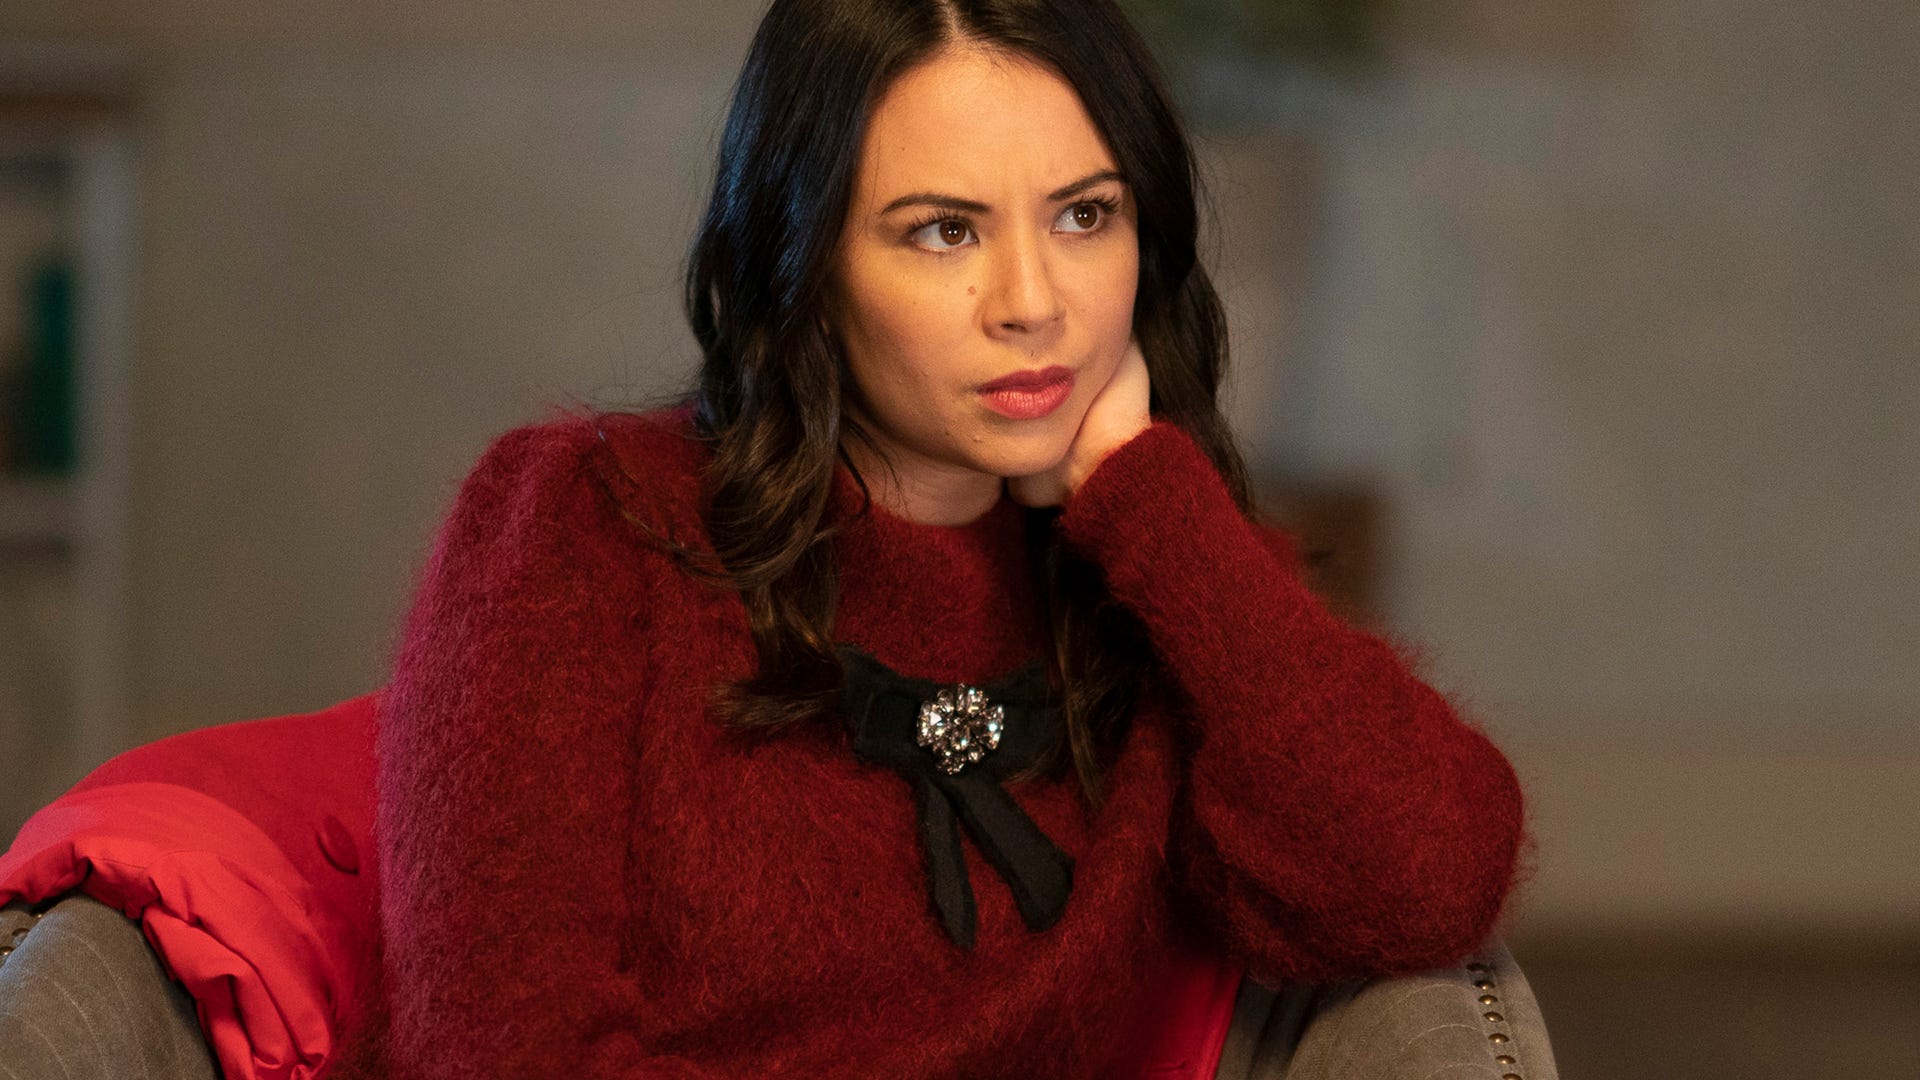 Janel Parrish, Pretty Little Liars: The Perfectionists​